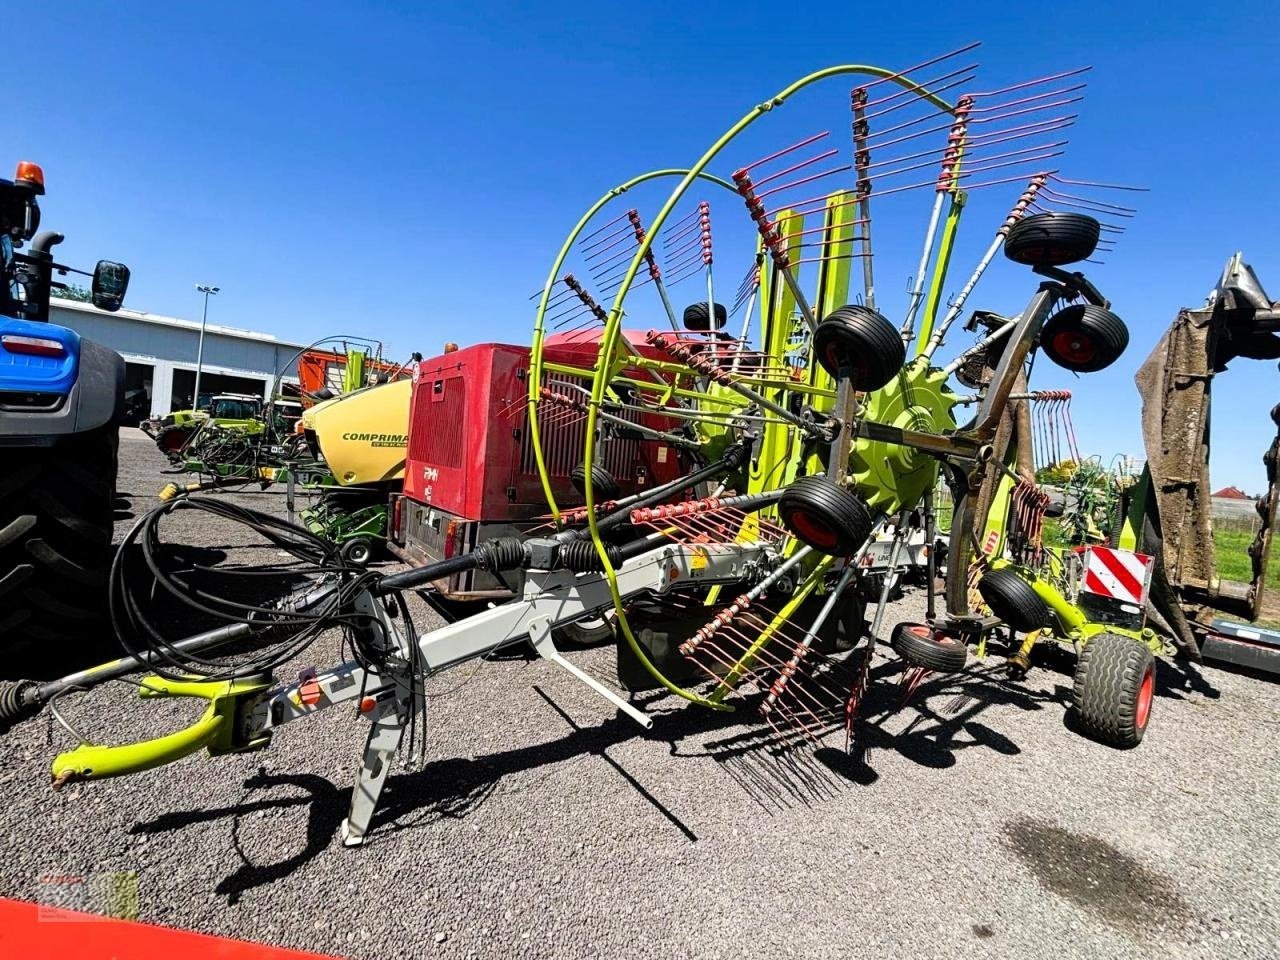 Claas Liner 2900 windrower €14,286